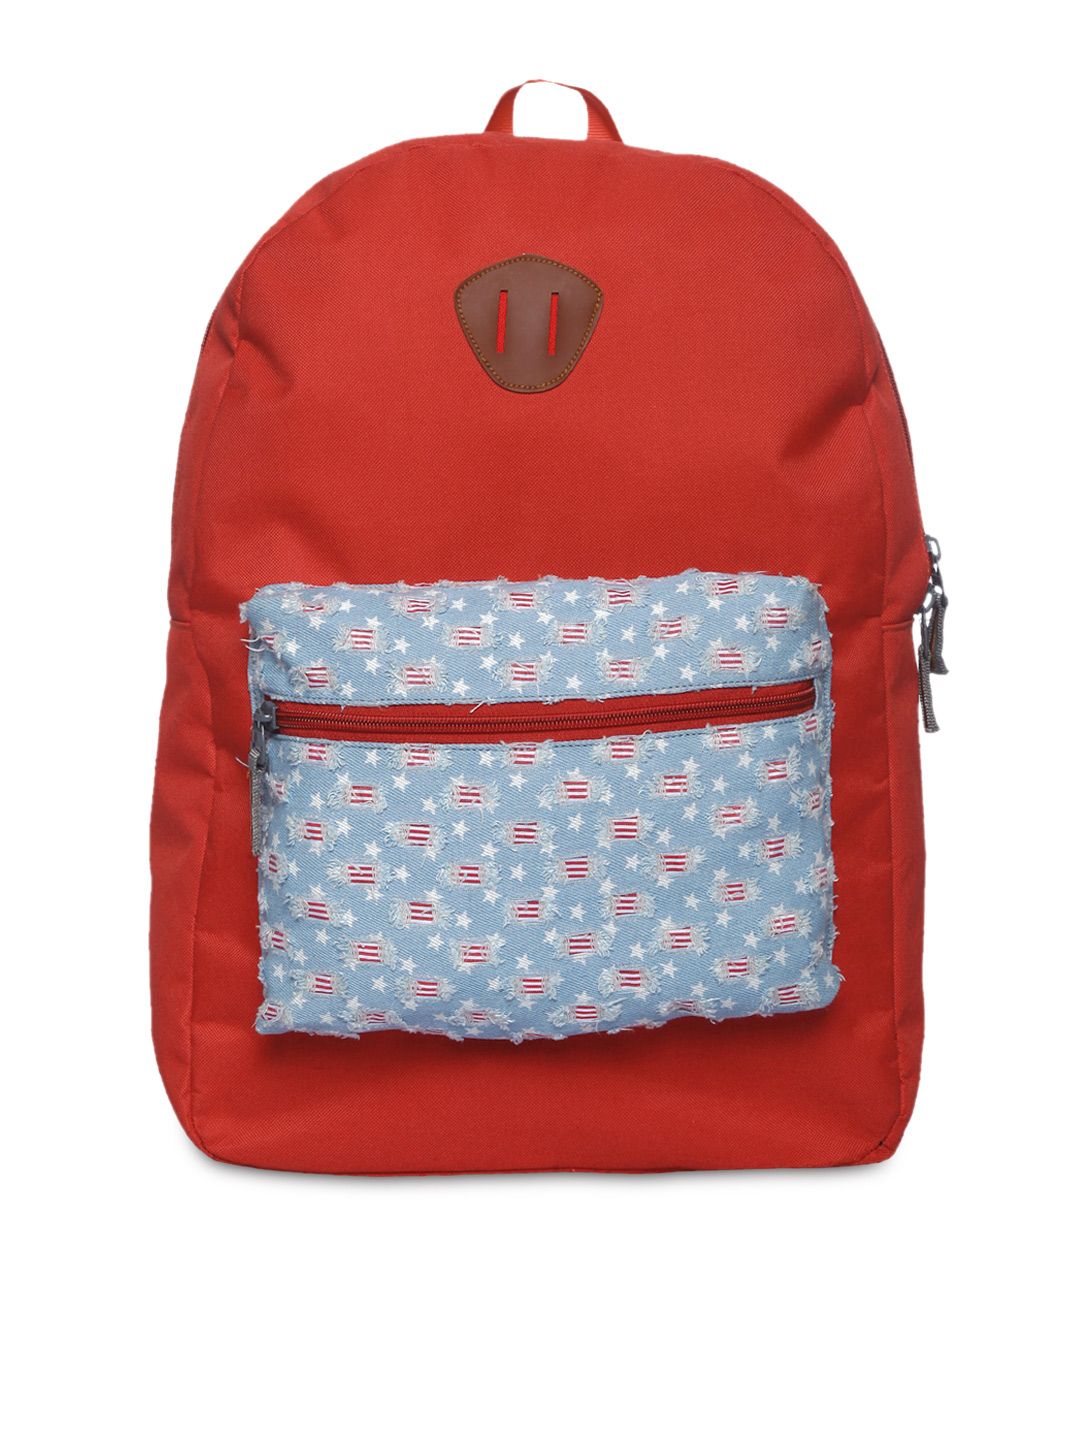 Impulse Unisex Red Printed Backpack Price in India